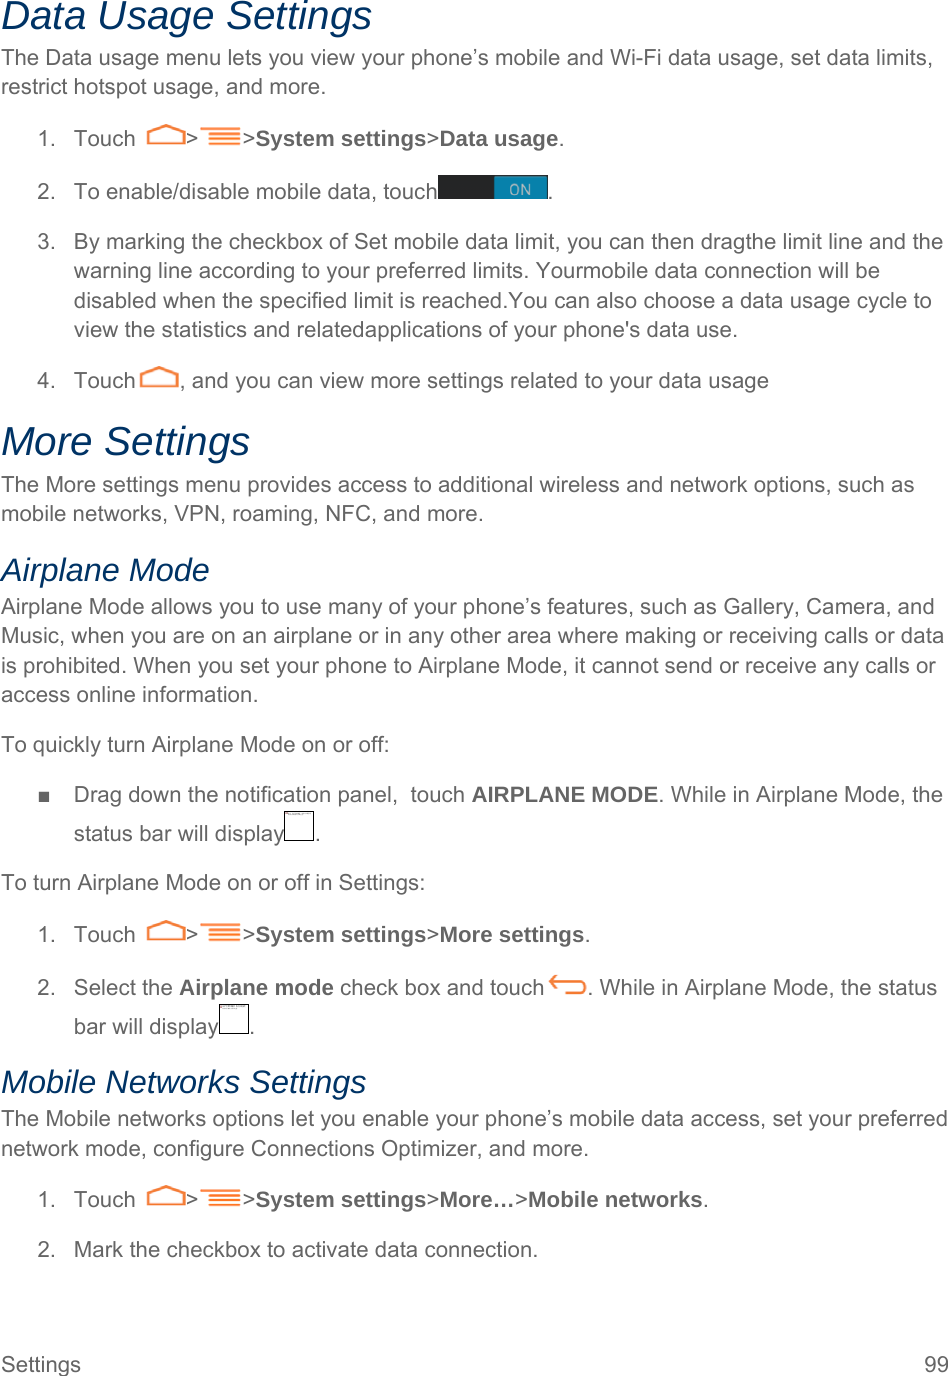 Settings  99 Data Usage Settings The Data usage menu lets you view your phone’s mobile and Wi-Fi data usage, set data limits, restrict hotspot usage, and more. 1. Touch  &gt; &gt;System settings&gt;Data usage. 2.  To enable/disable mobile data, touch . 3.  By marking the checkbox of Set mobile data limit, you can then dragthe limit line and the warning line according to your preferred limits. Yourmobile data connection will be disabled when the specified limit is reached.You can also choose a data usage cycle to view the statistics and relatedapplications of your phone&apos;s data use. 4.  Touch , and you can view more settings related to your data usage More Settings The More settings menu provides access to additional wireless and network options, such as mobile networks, VPN, roaming, NFC, and more. Airplane Mode Airplane Mode allows you to use many of your phone’s features, such as Gallery, Camera, and Music, when you are on an airplane or in any other area where making or receiving calls or data is prohibited. When you set your phone to Airplane Mode, it cannot send or receive any calls or access online information. To quickly turn Airplane Mode on or off: ■  Drag down the notification panel,  touch AIRPLANE MODE. While in Airplane Mode, the status bar will display . To turn Airplane Mode on or off in Settings: 1. Touch  &gt; &gt;System settings&gt;More settings. 2. Select the Airplane mode check box and touch . While in Airplane Mode, the status bar will display . Mobile Networks Settings The Mobile networks options let you enable your phone’s mobile data access, set your preferred network mode, configure Connections Optimizer, and more. 1. Touch  &gt; &gt;System settings&gt;More…&gt;Mobile networks. 2.  Mark the checkbox to activate data connection. 无法显示链接的图像。该文件可能已被移动、重命名或删除。请验证该链接是否指向正确的文件和位置。无法显示链接的图像。该文件可能已被移动、重命名或删除。请验证该链接是否指向正确的文件和位置。